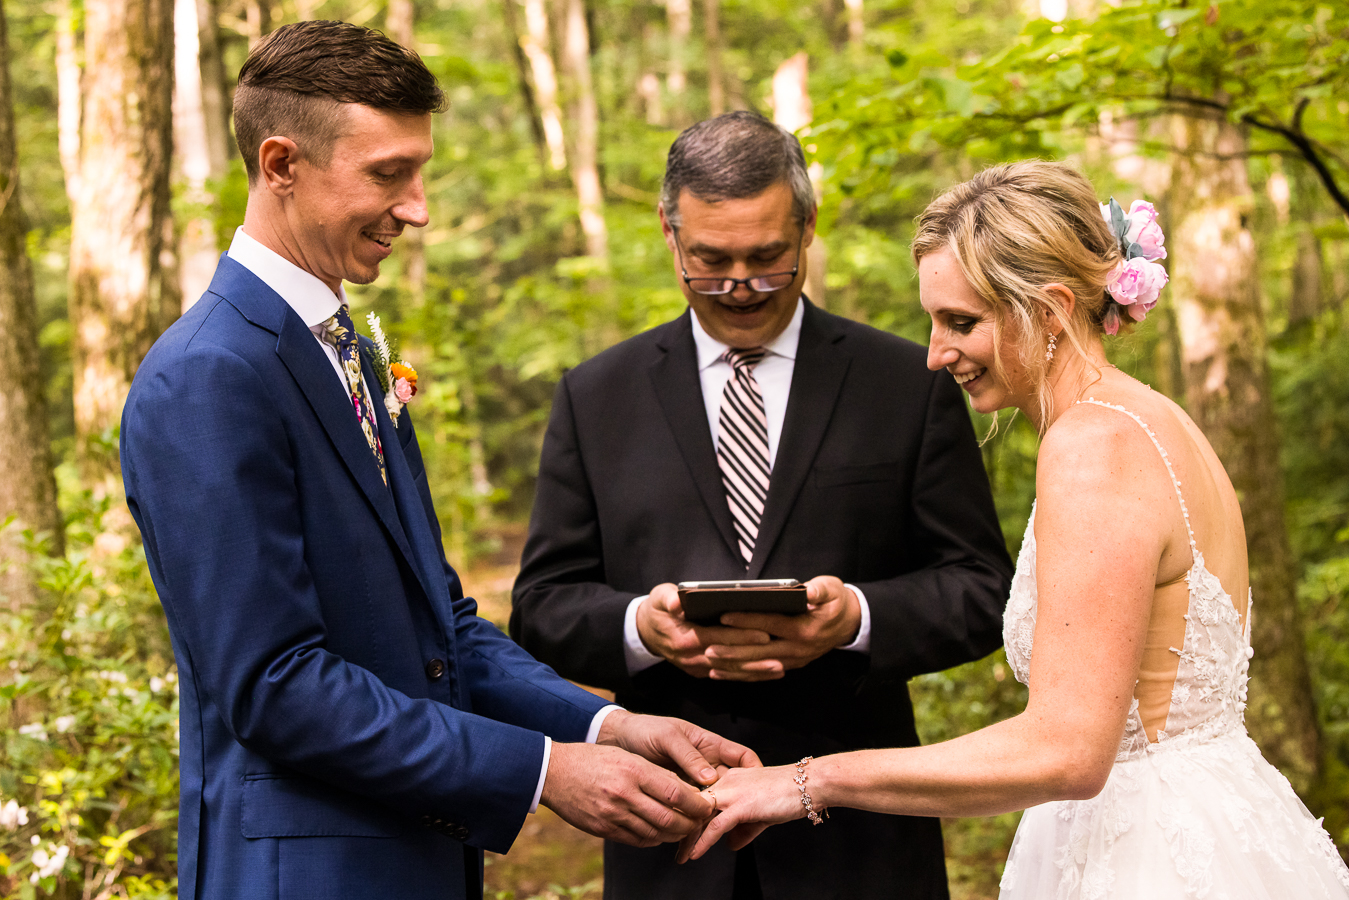 vibrant, colorful image of the groom placing the ring onto his brides finger as they stand underneath the trees on a hiking trail for their intimate wedding ceremony captured by micro wedding photographer, lisa rhinehart